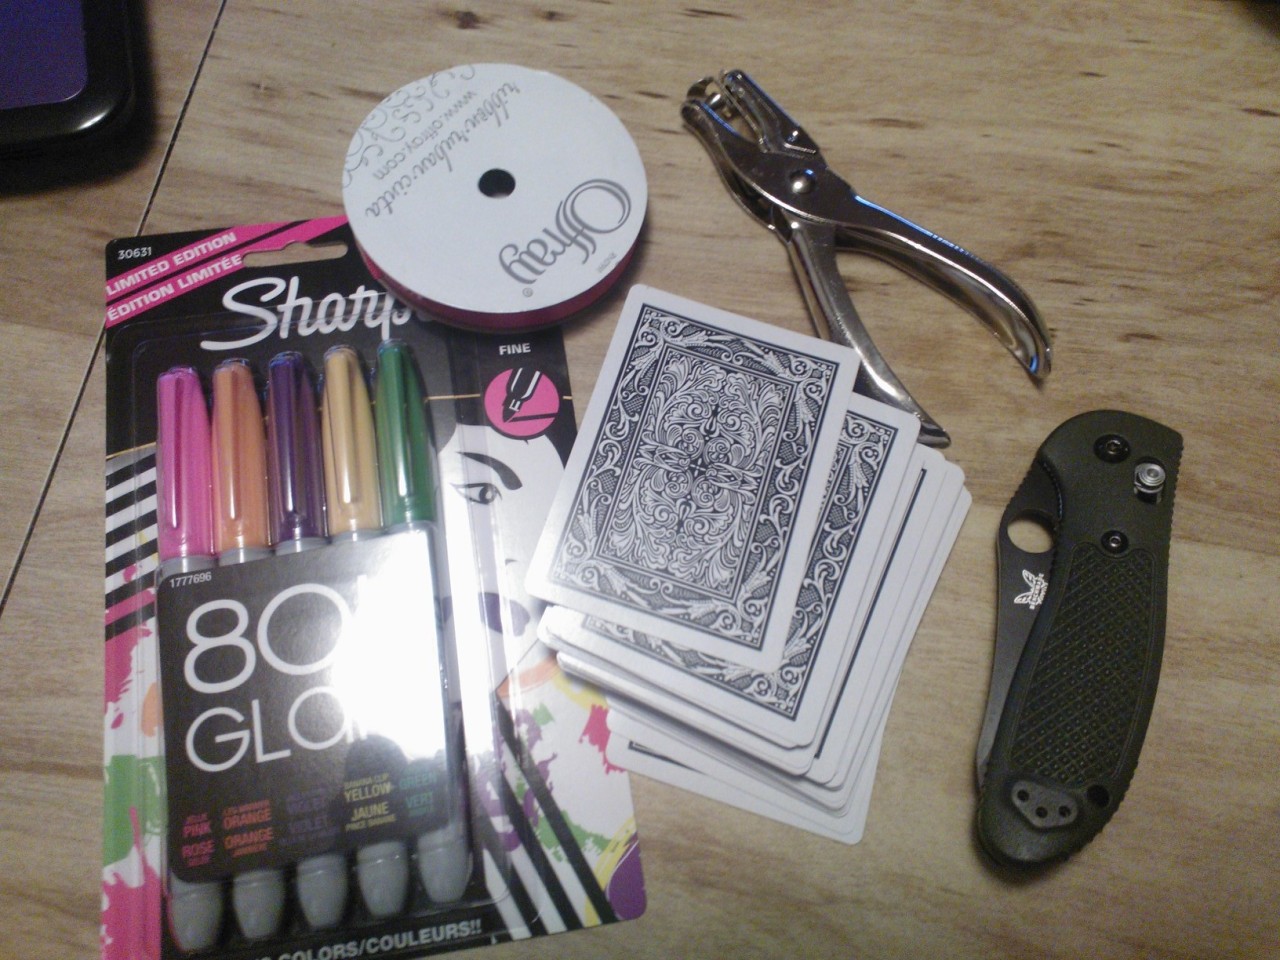 Got my supplies for my &ldquo;52 reasons why I love you&rdquo; project :)